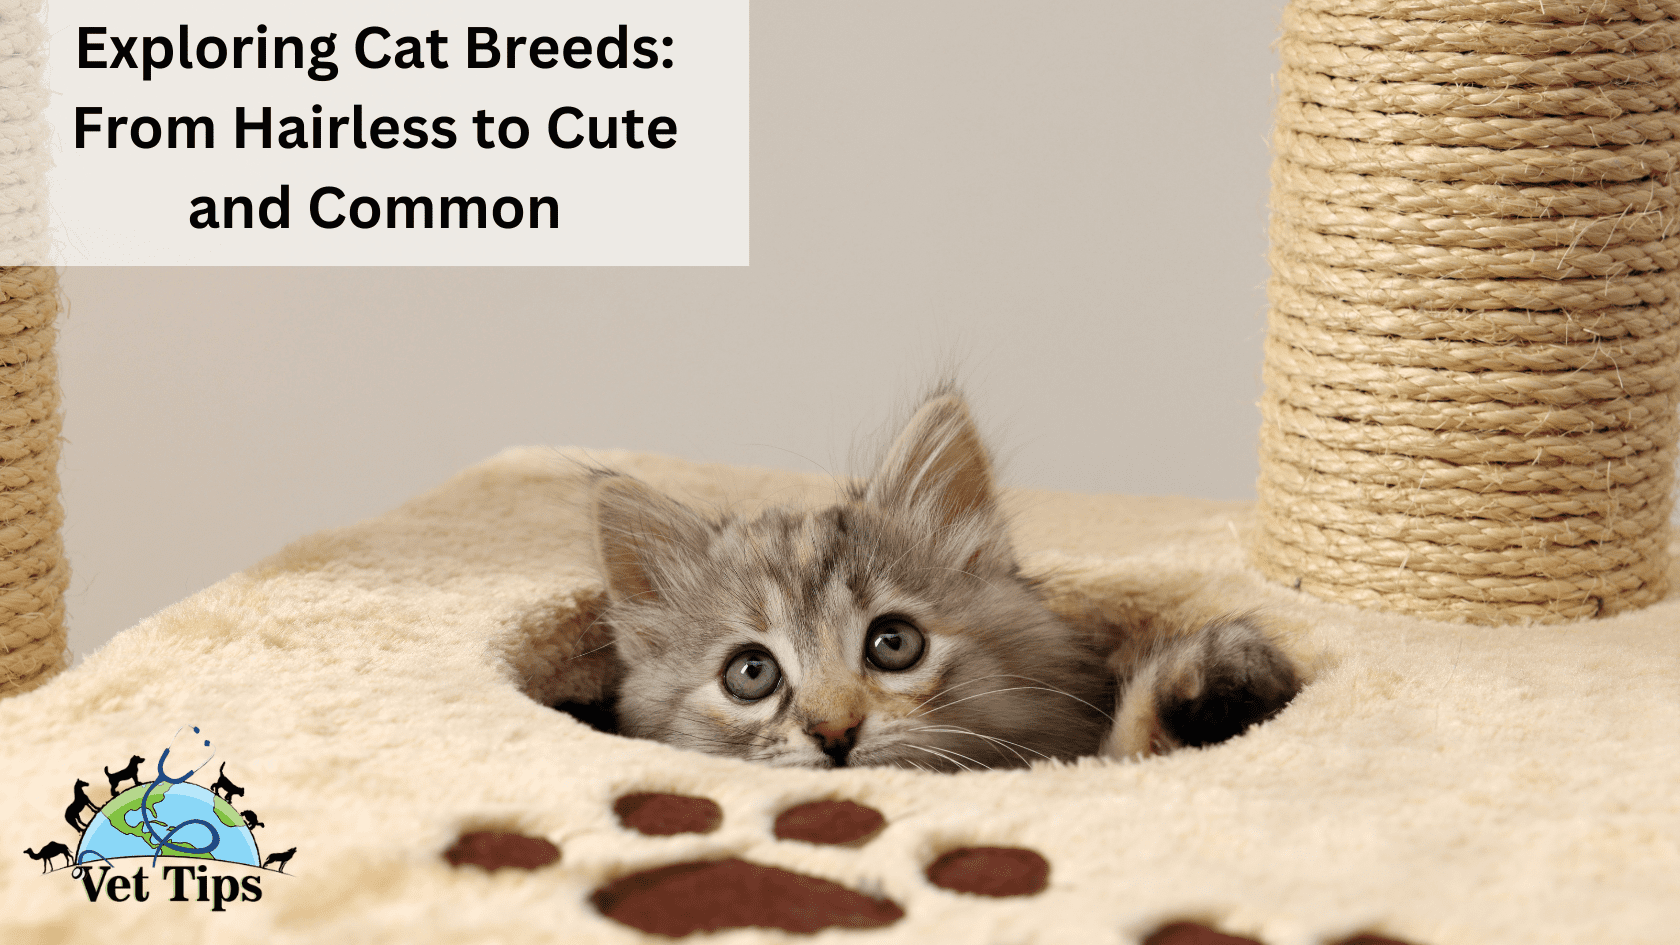 Exploring Cat Breeds: From Hairless to Cute and Common